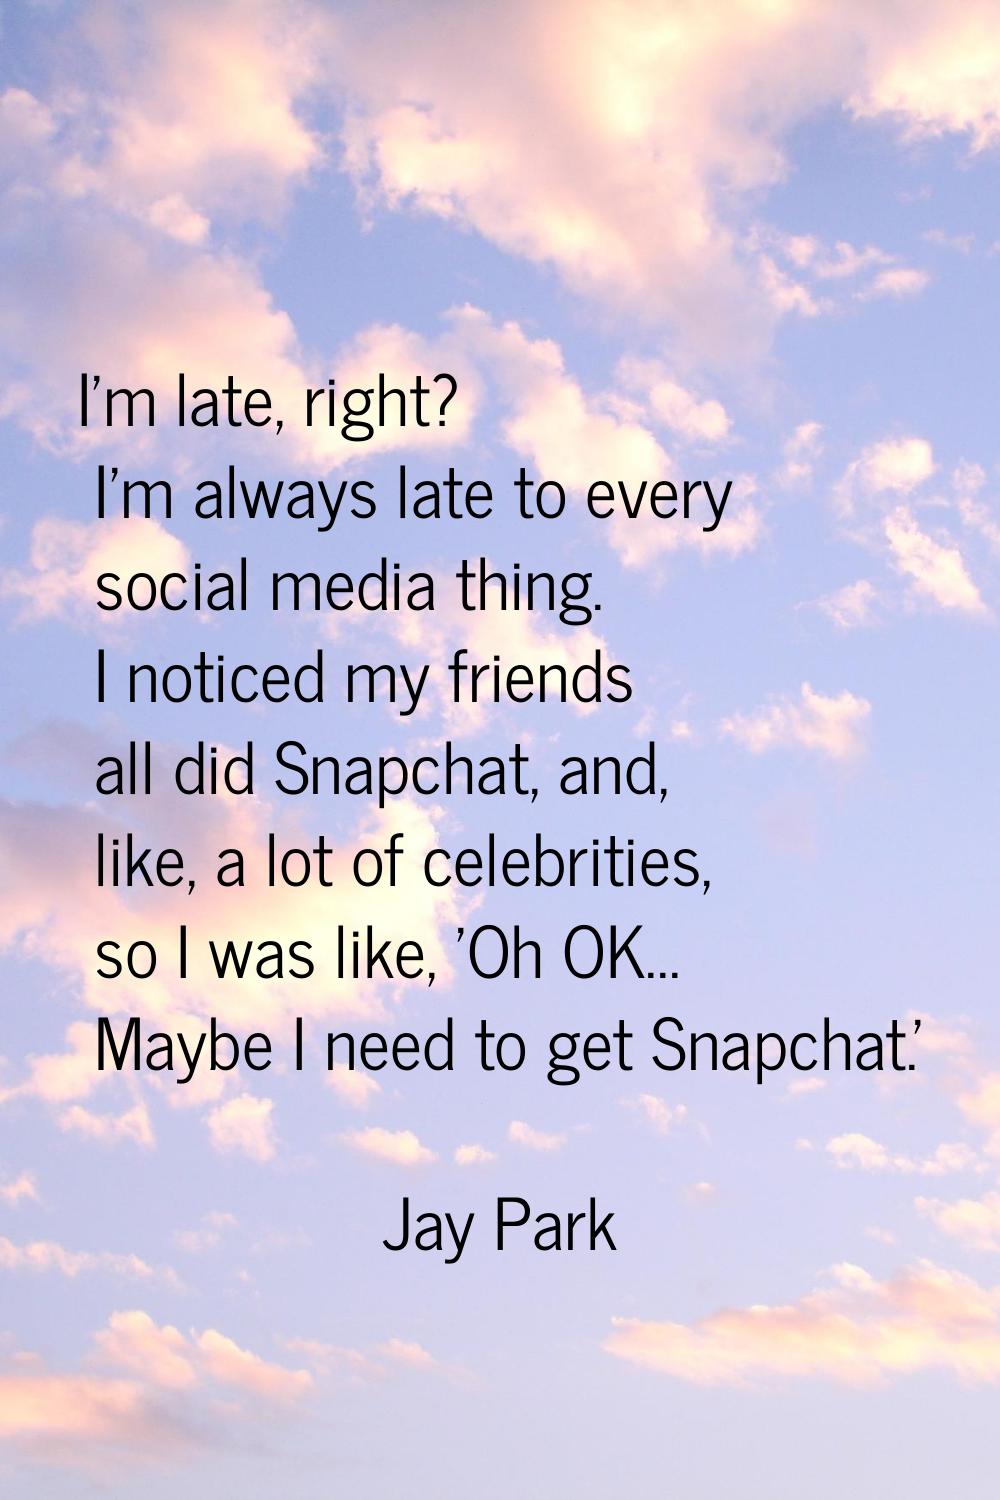 I'm late, right? I'm always late to every social media thing. I noticed my friends all did Snapchat